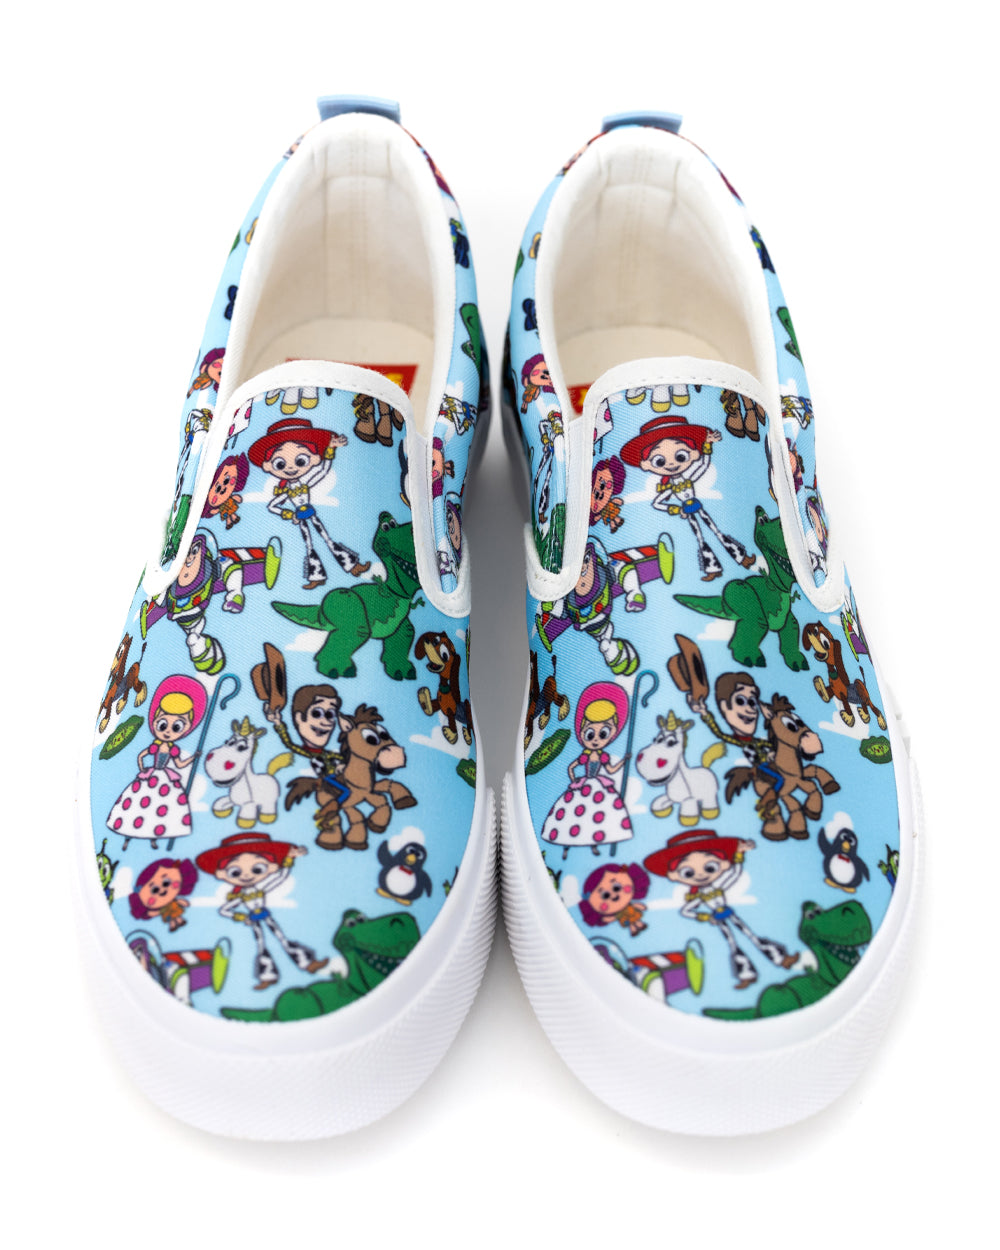 Disney Pixars Toy Story Shoes - PALM Exclusive - The Pink a la Mode - Ground Up - The Pink a la Mode